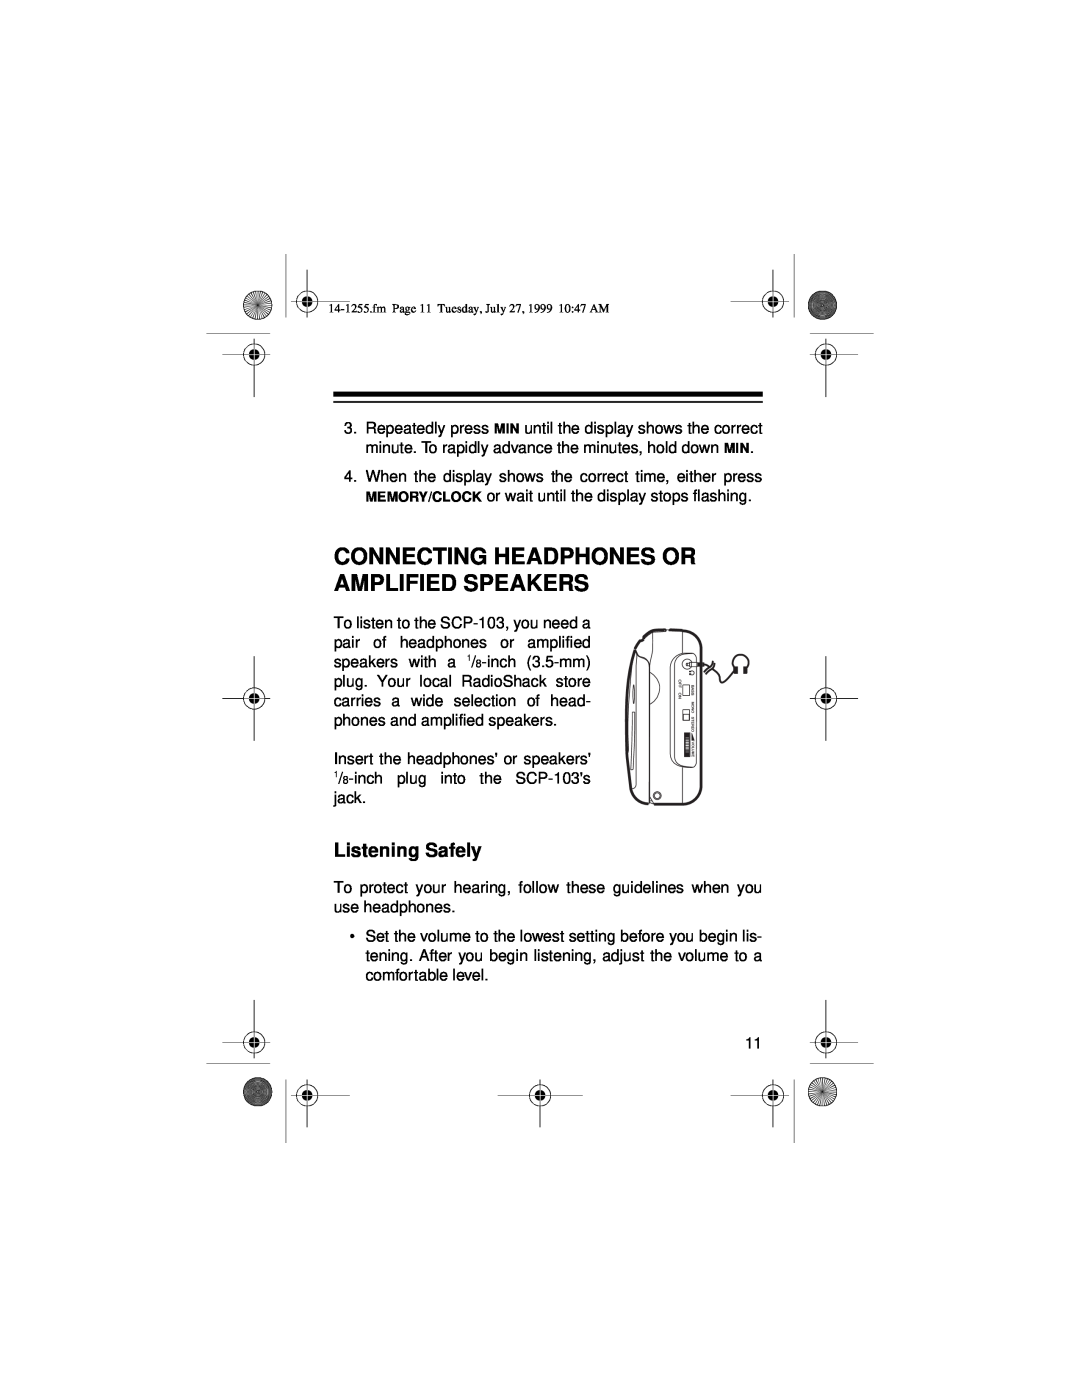 Optimus SCP-103 owner manual Connecting Headphones Or Amplified Speakers, Listening Safely 